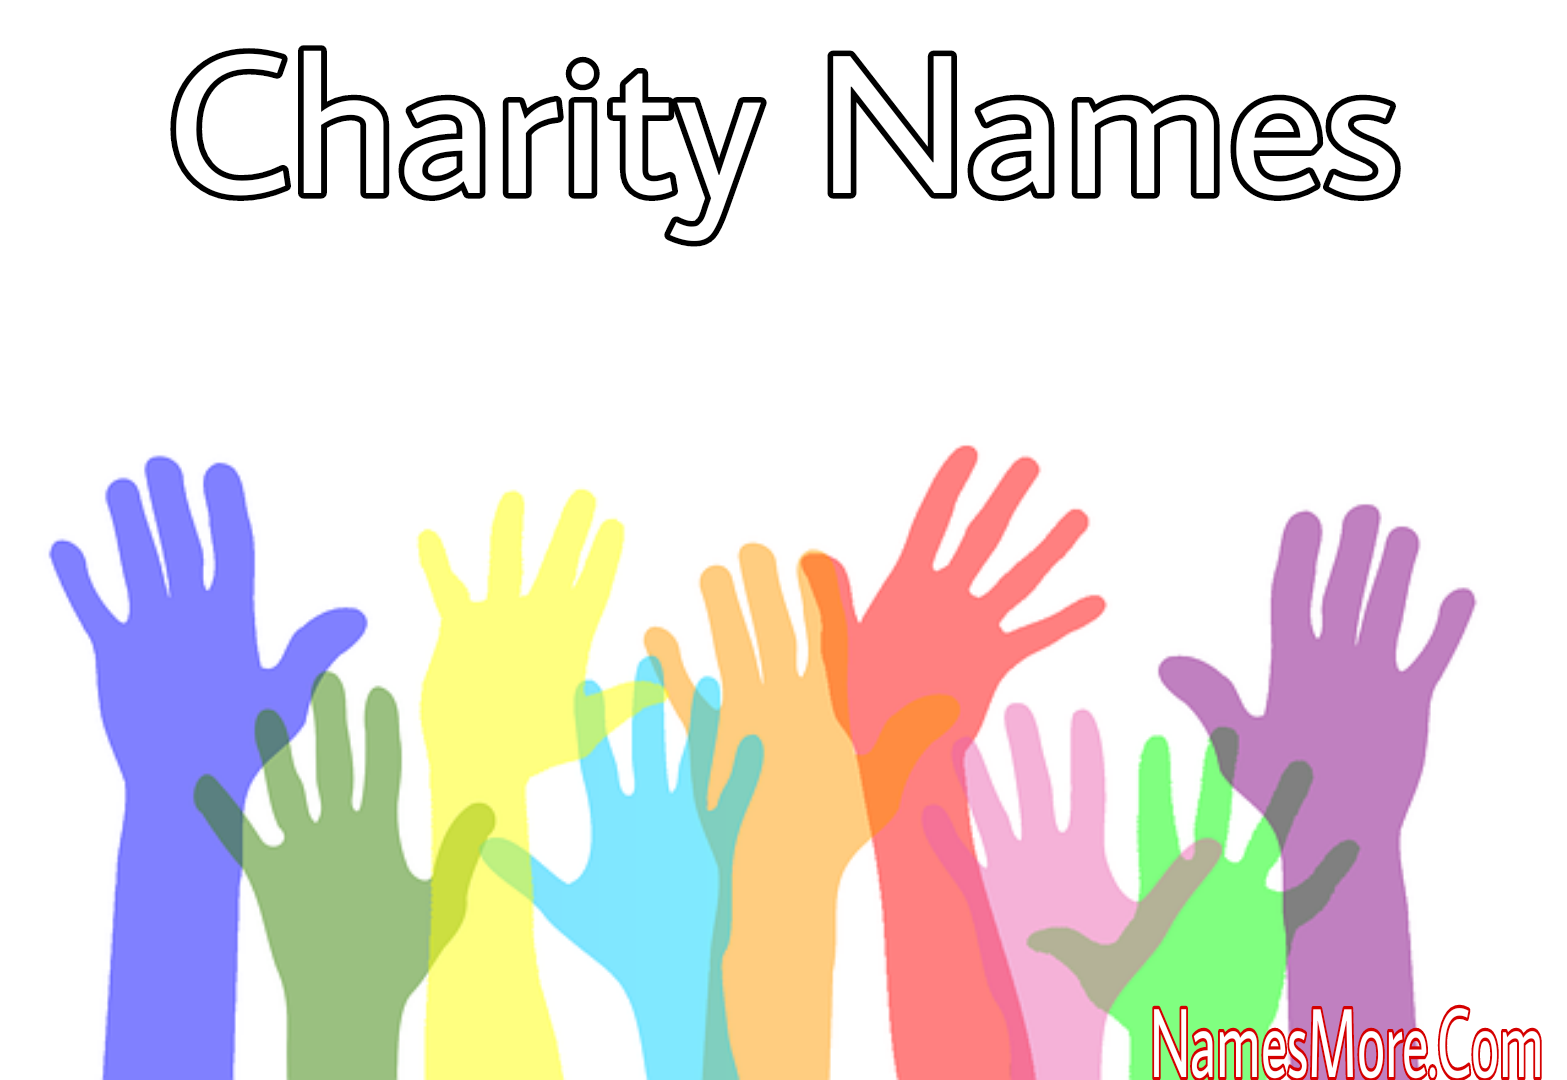 Featured Image for 2600+ Charity Names [Creative & Uniuqe]